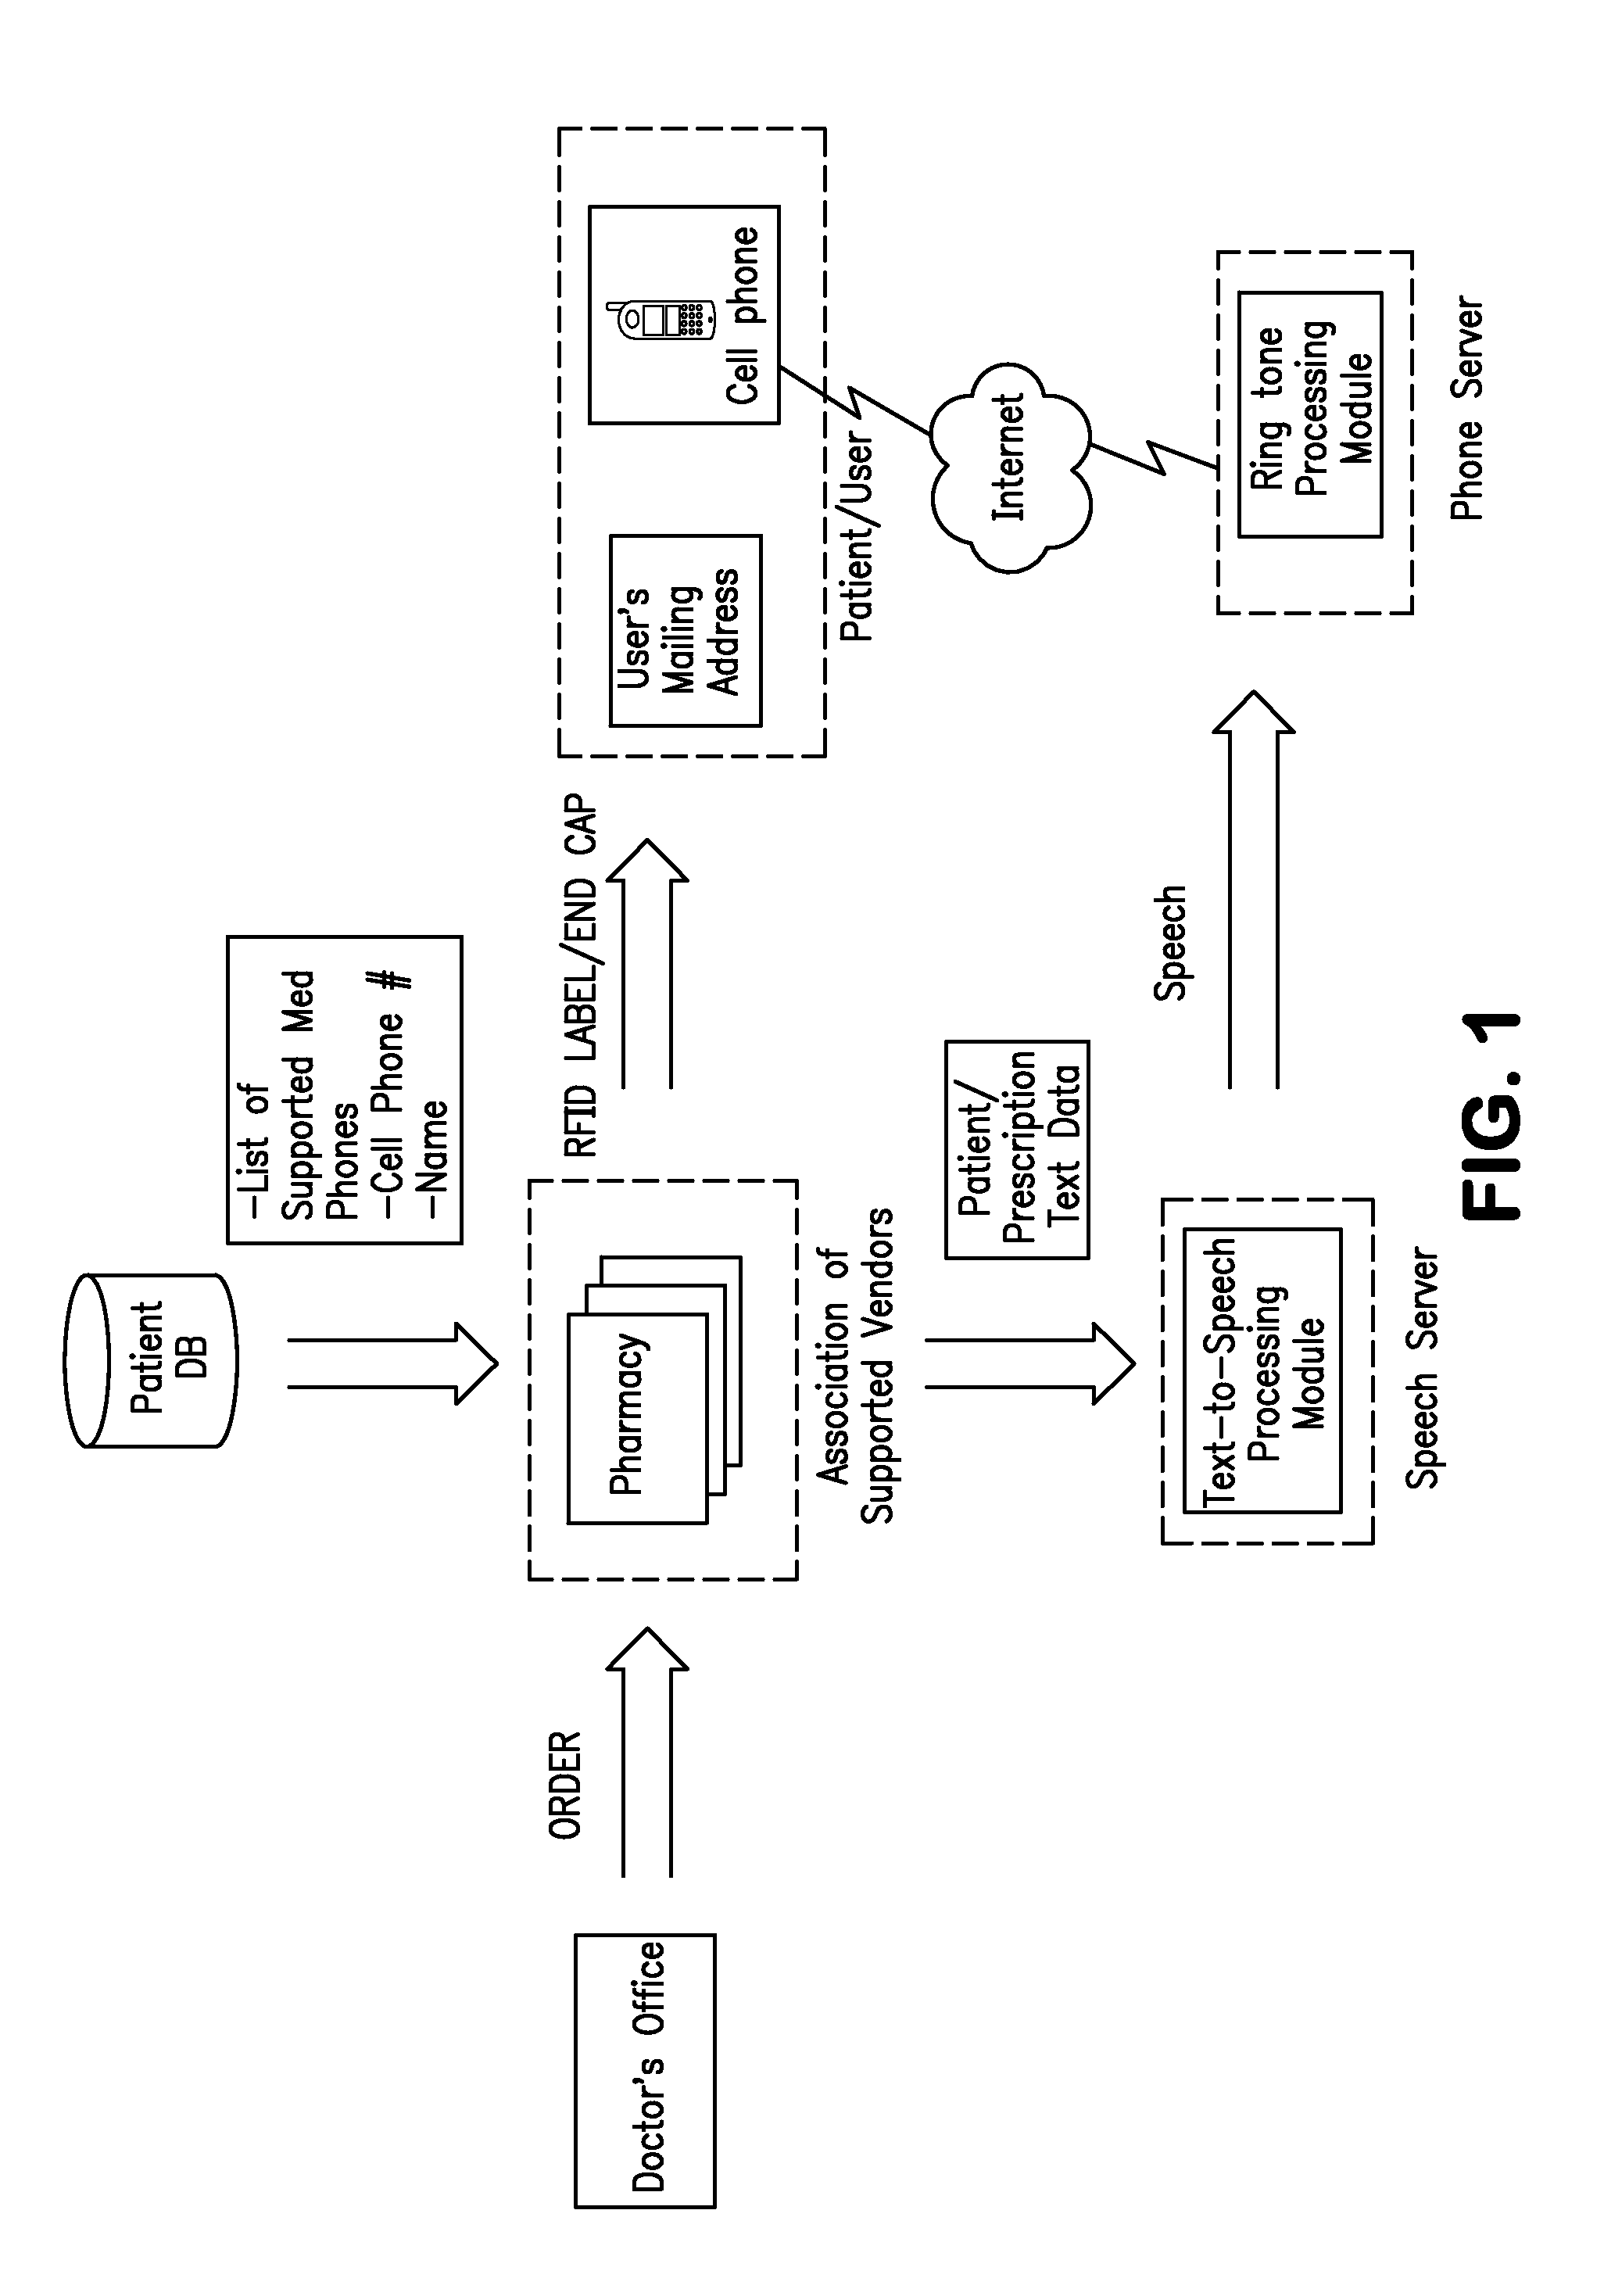 Apparatus, Method, Device And Computer Program Product For Audibly Communicating Medicine Identity, Dosage And Intake Instruction